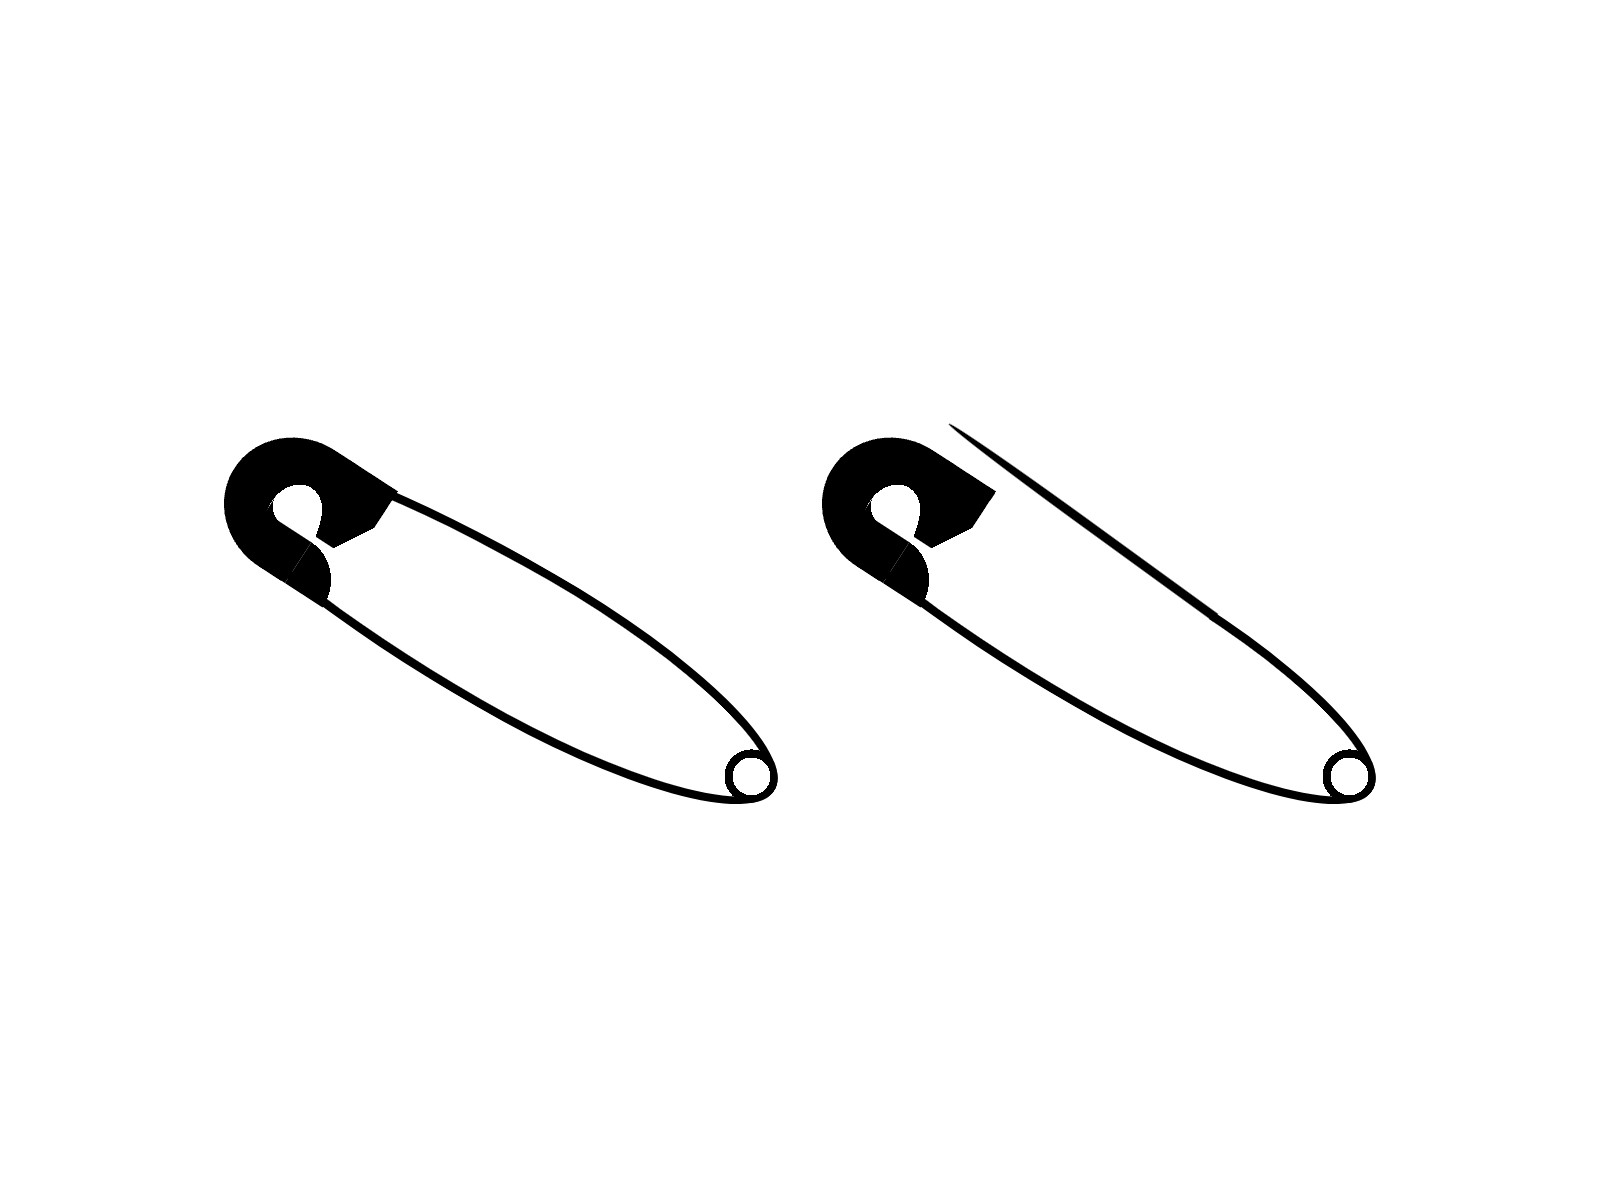 Cartoon of two safety pins